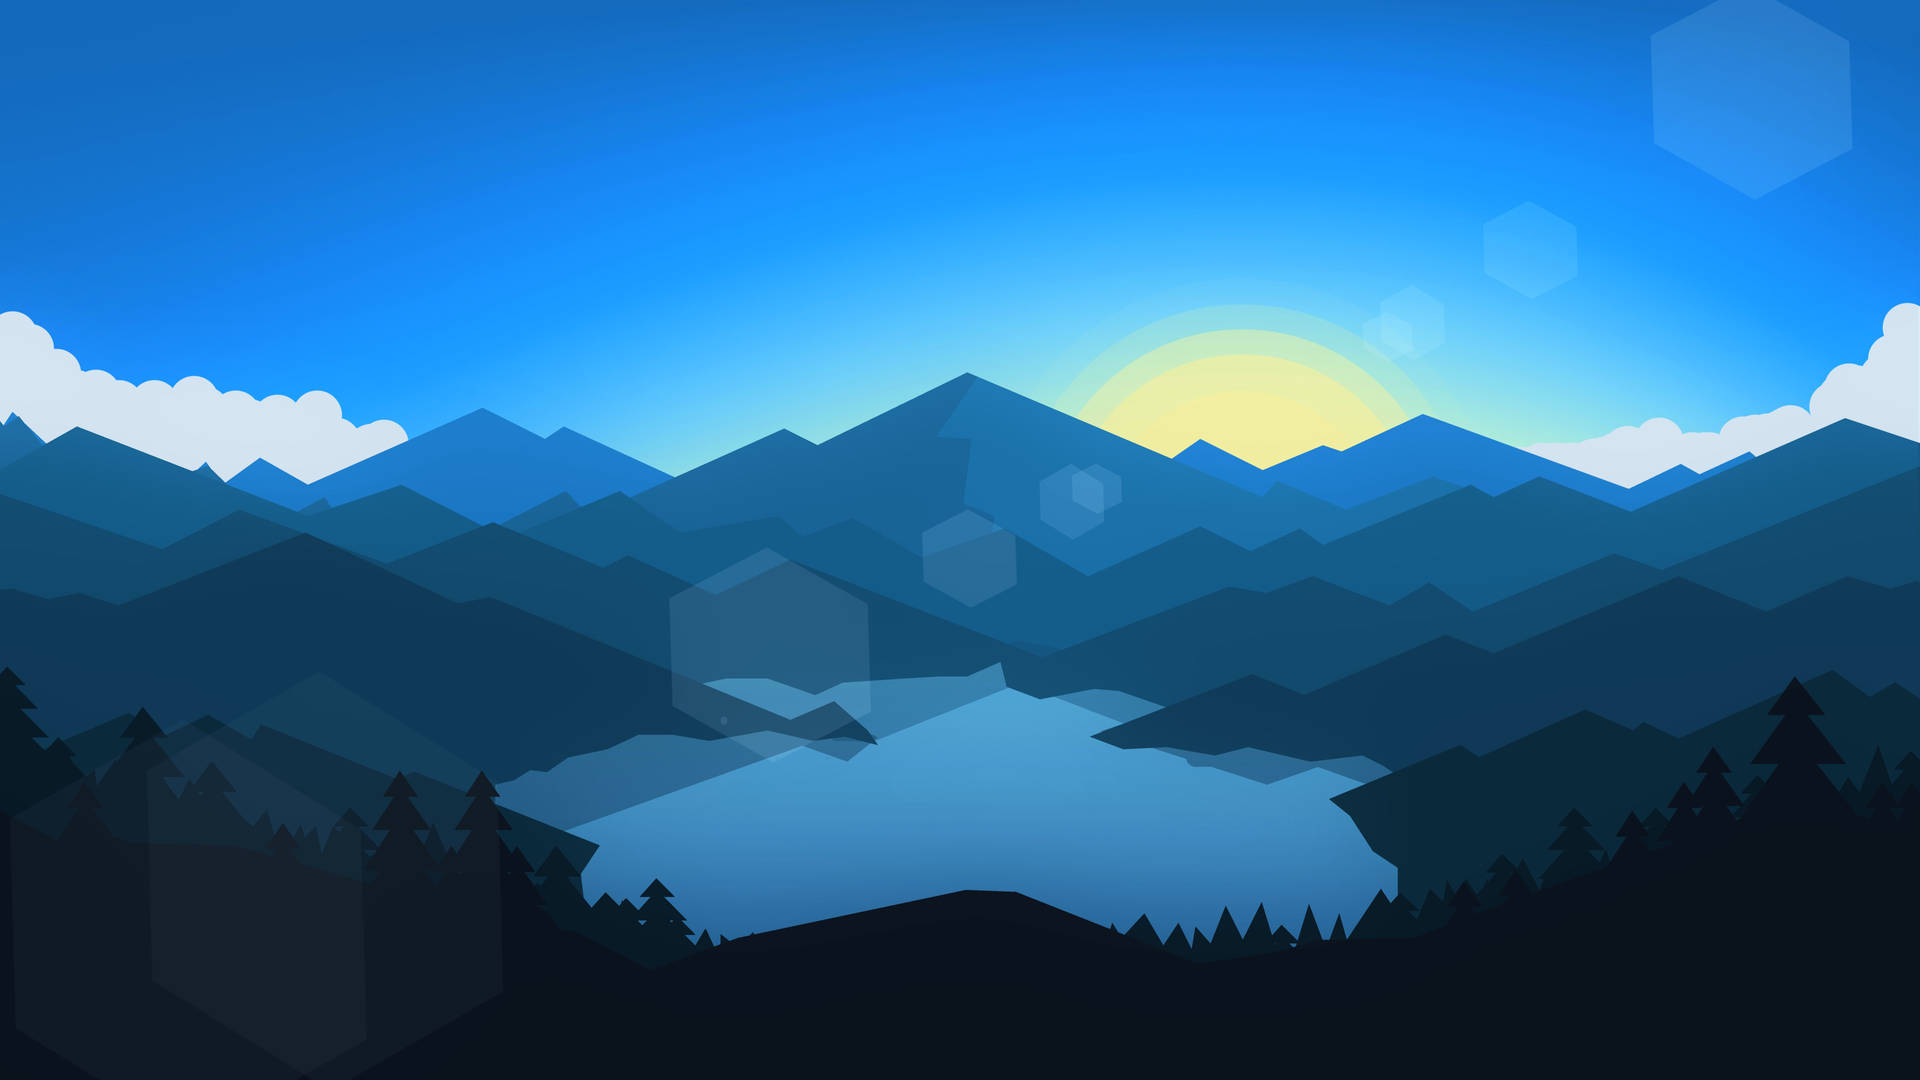 Cool Landscape Night Minimal Art Wallpaper HD Minimalist 4K Wallpapers  Images and Background  Wallpapers Den